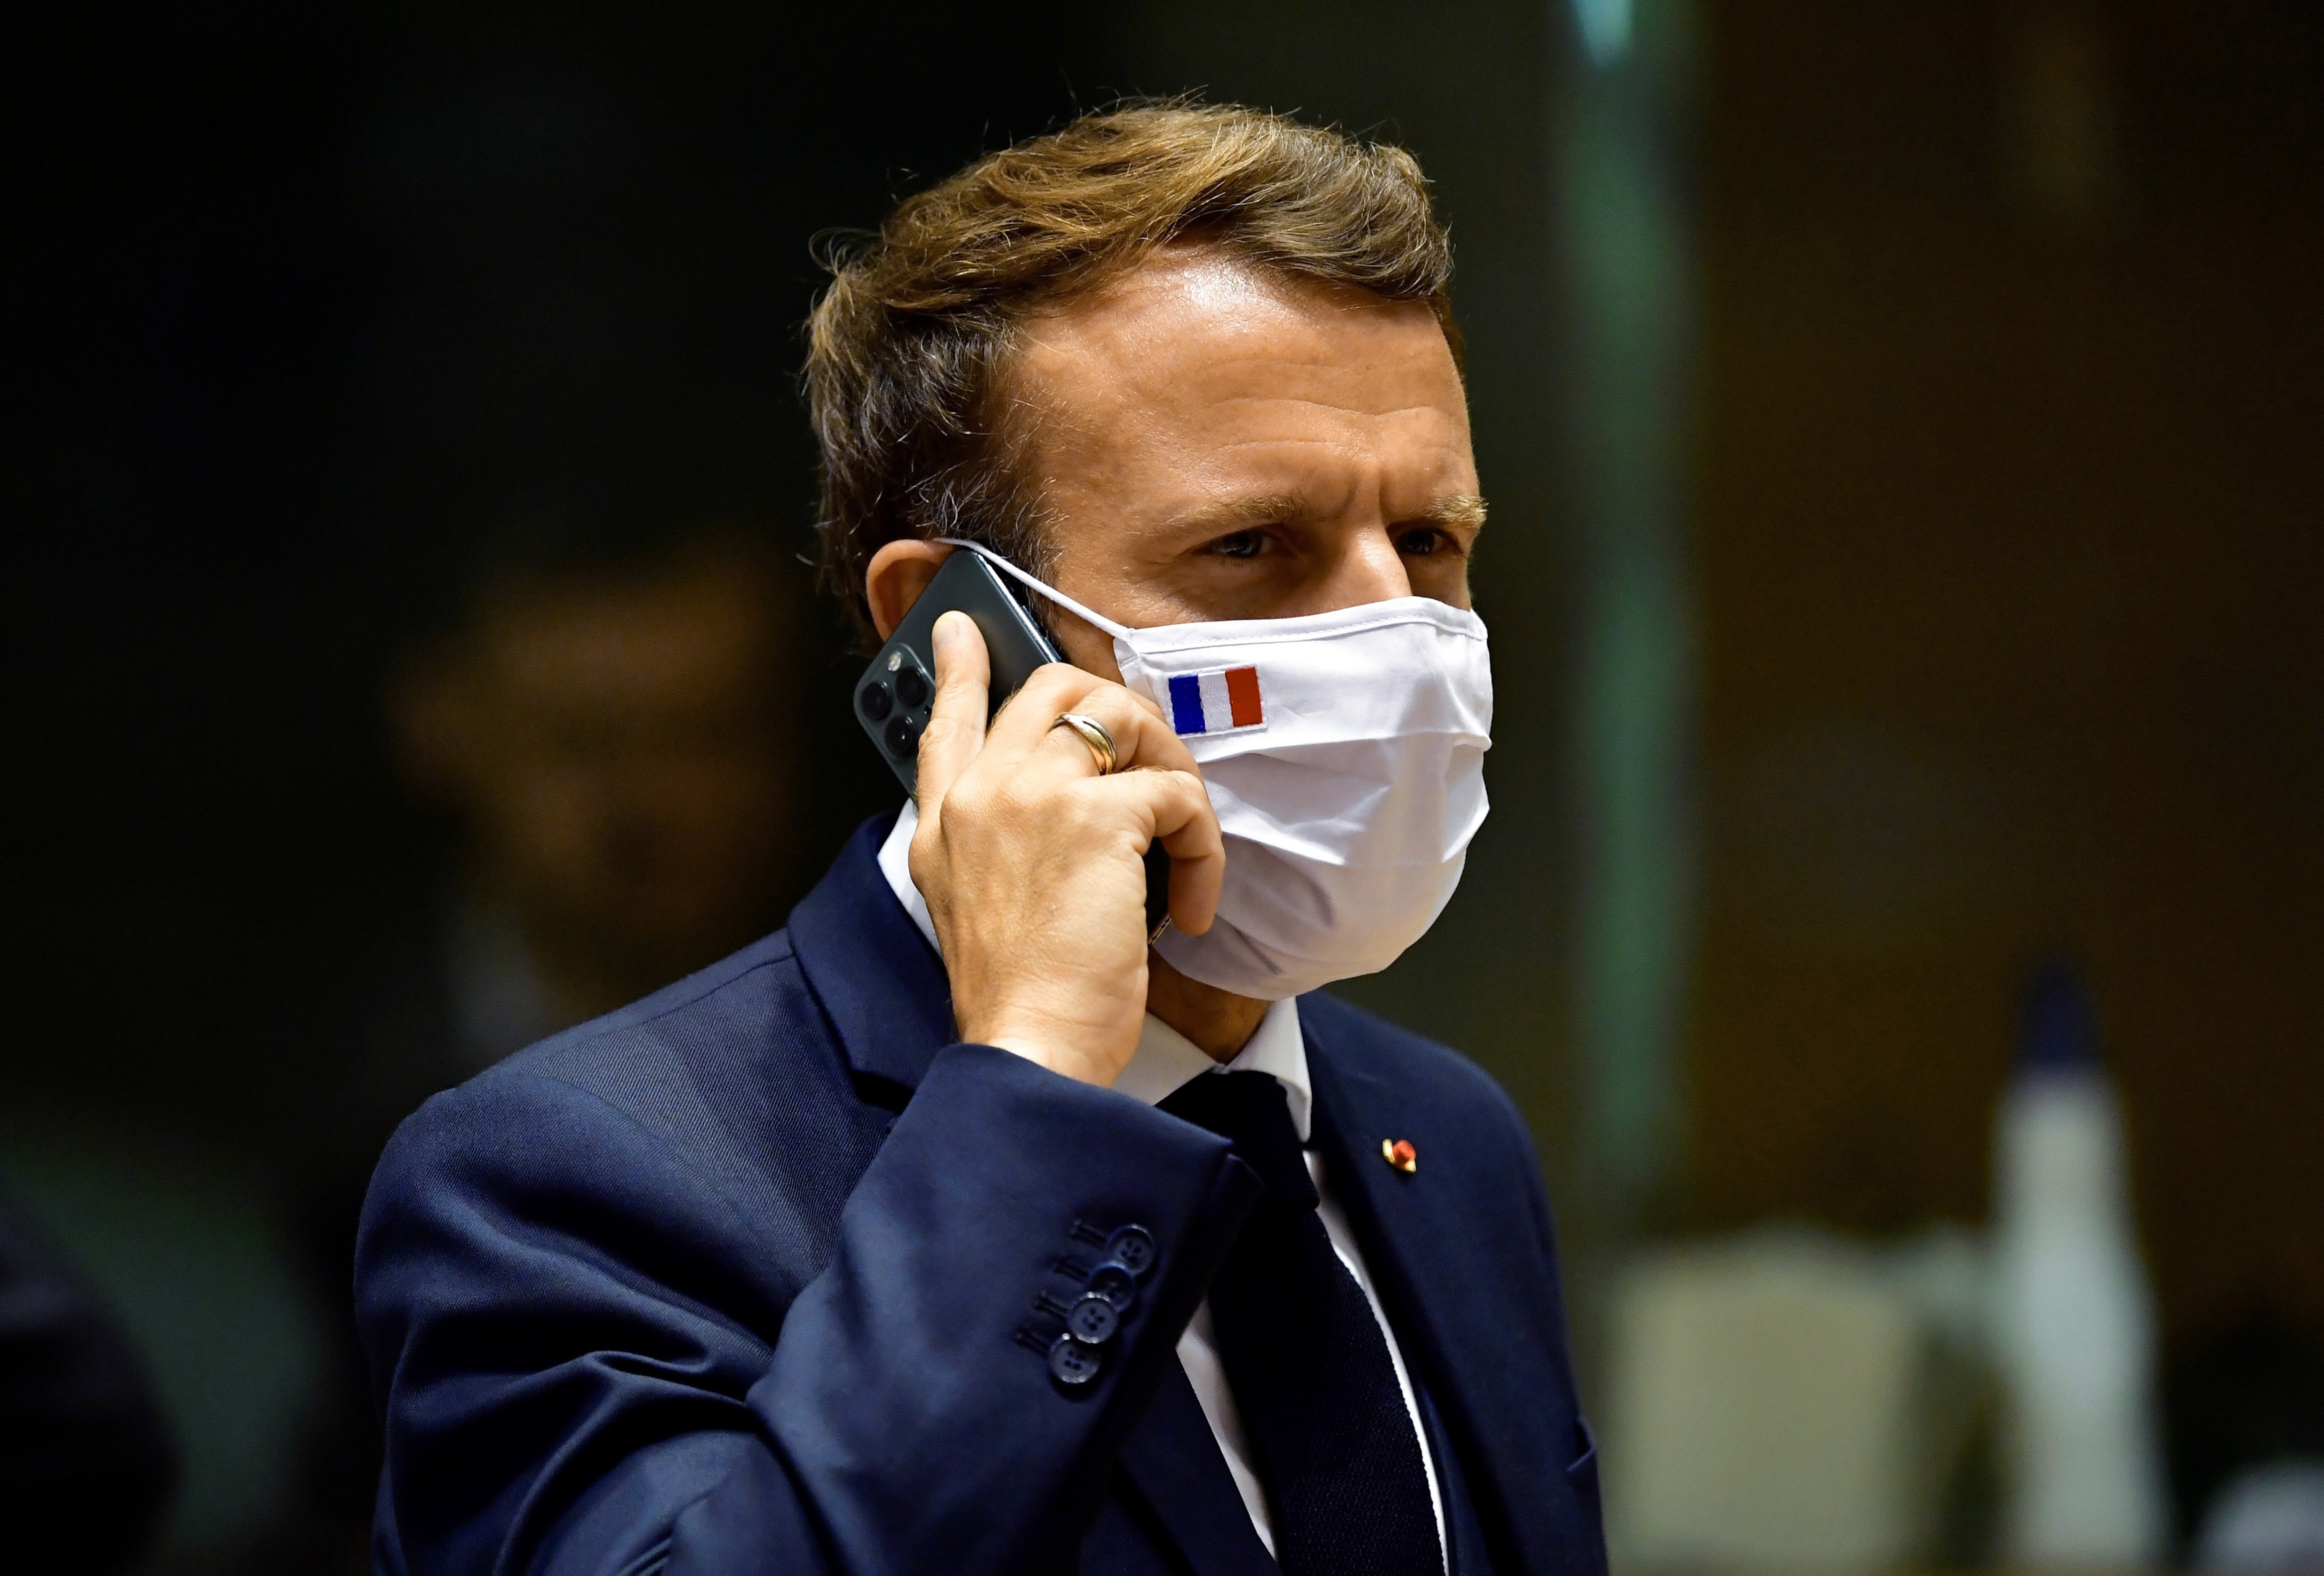 French President Emmanuel Macron speaks on his mobile phone during a round table meeting at an EU summit in Brussels on July 20, 2020. (John Thys—AP)